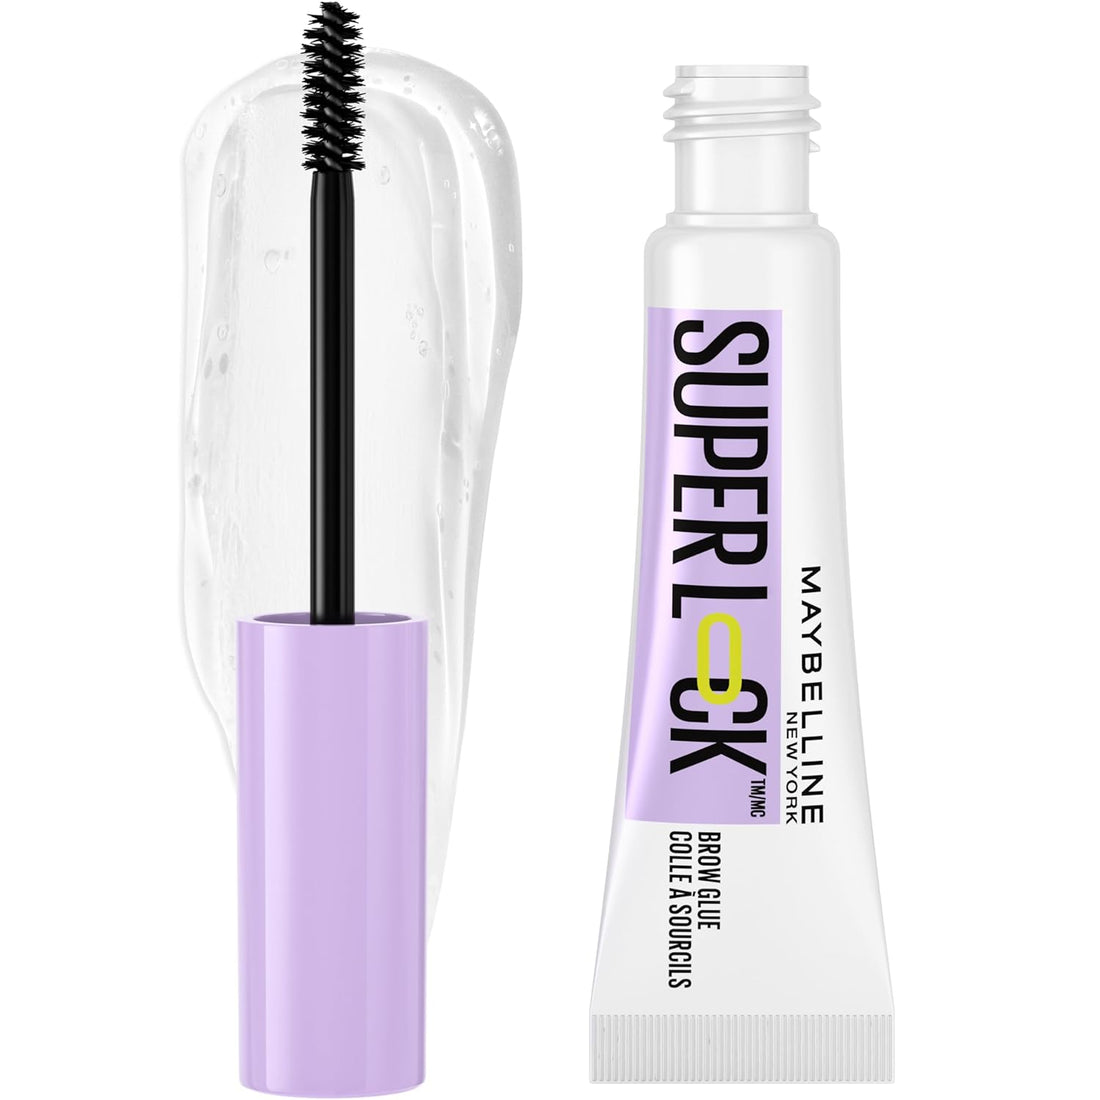 Super Lock Brow Glue Eyebrow Gel, Lightweight Brow Gel for up to 24HR Hold, Clear, 1 Count